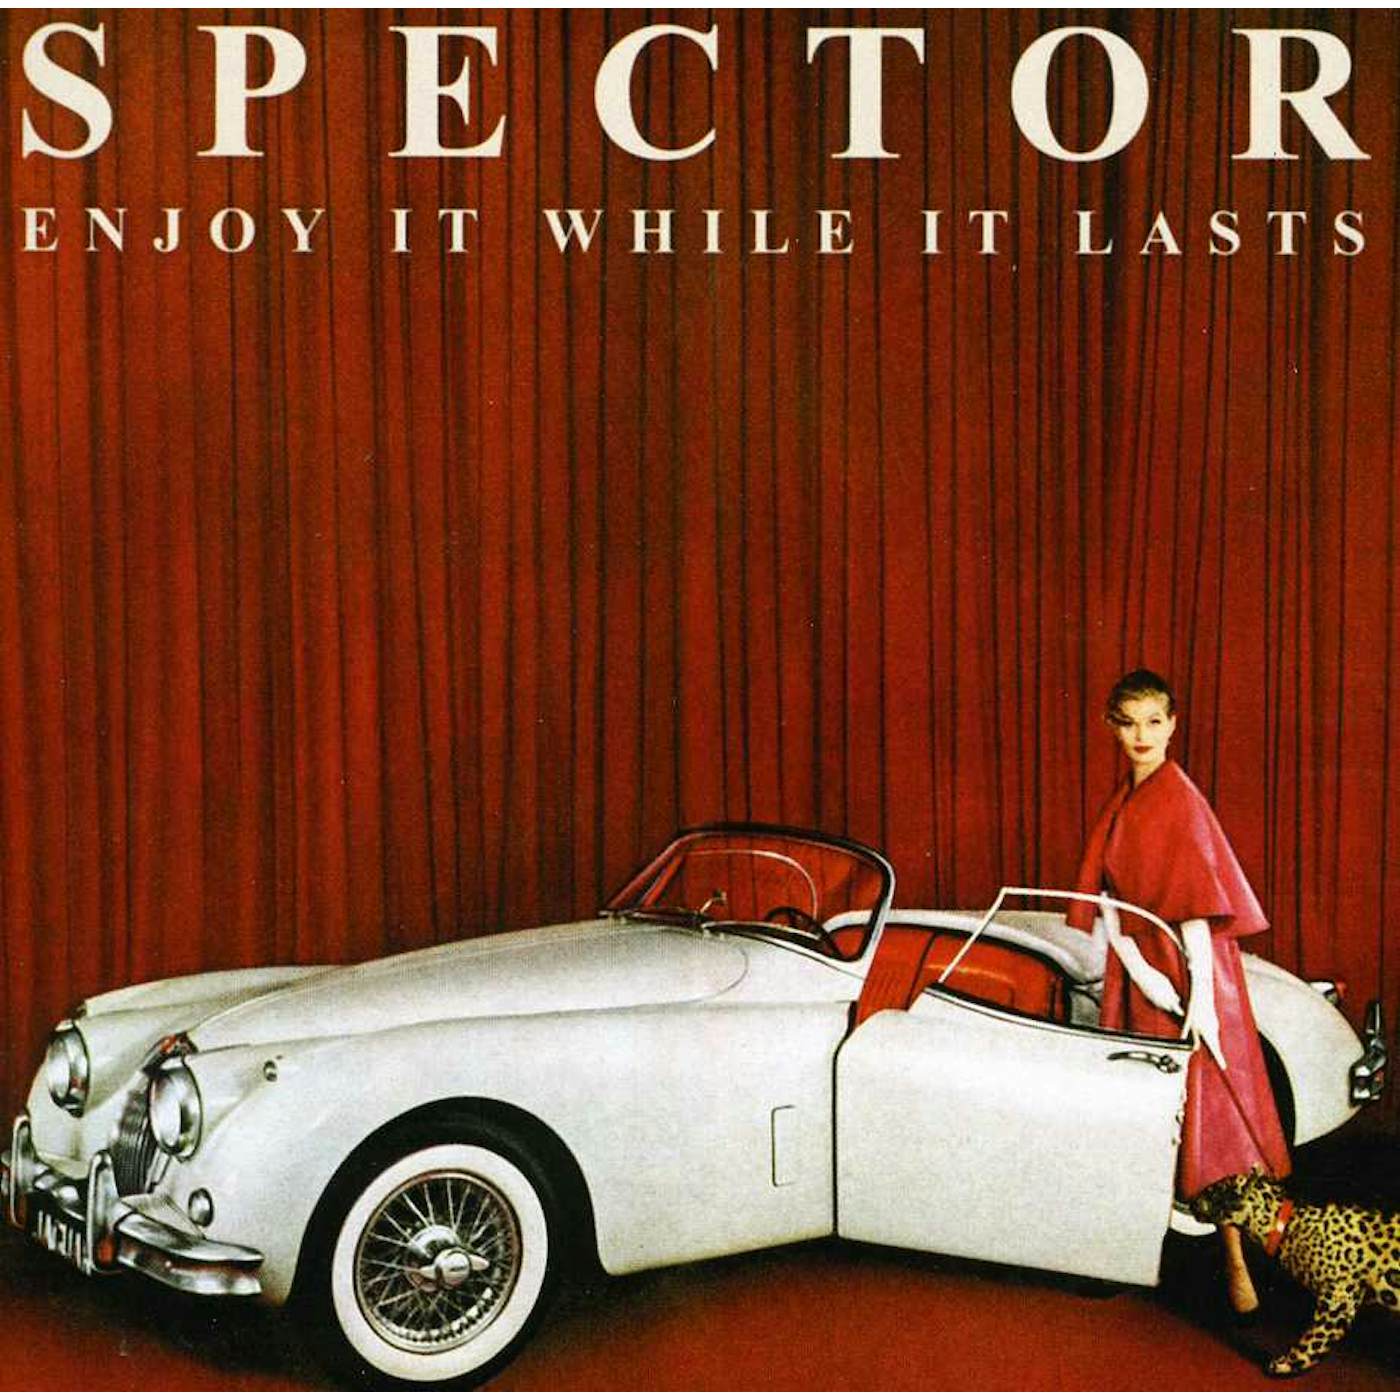 Spector ENJOY IT WHILE IT LASTS CD